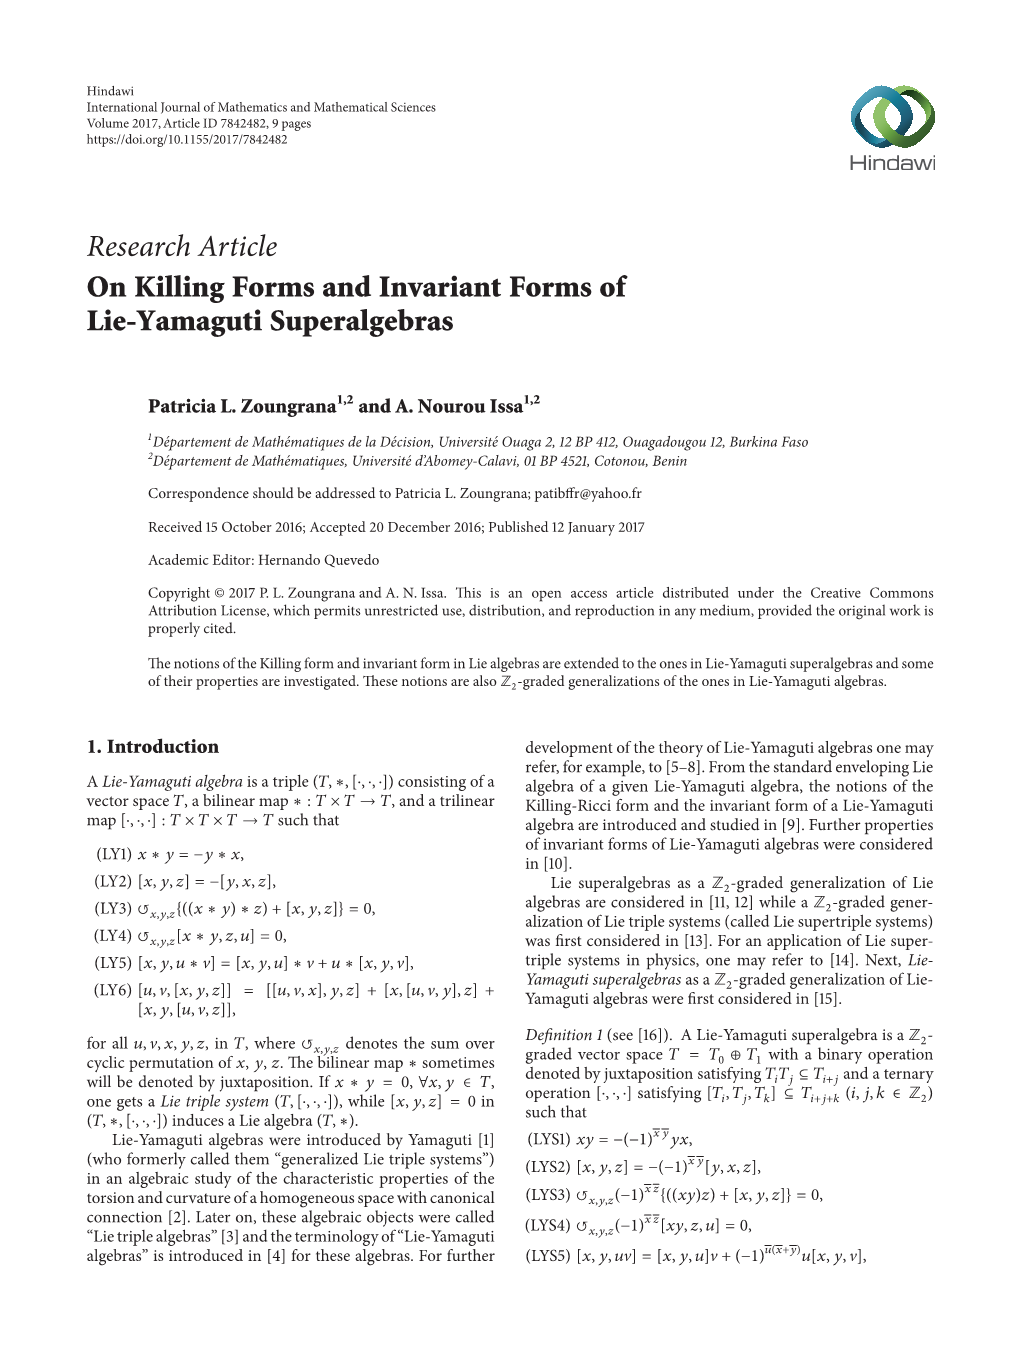 Research Article on Killing Forms and Invariant Forms of Lie-Yamaguti Superalgebras